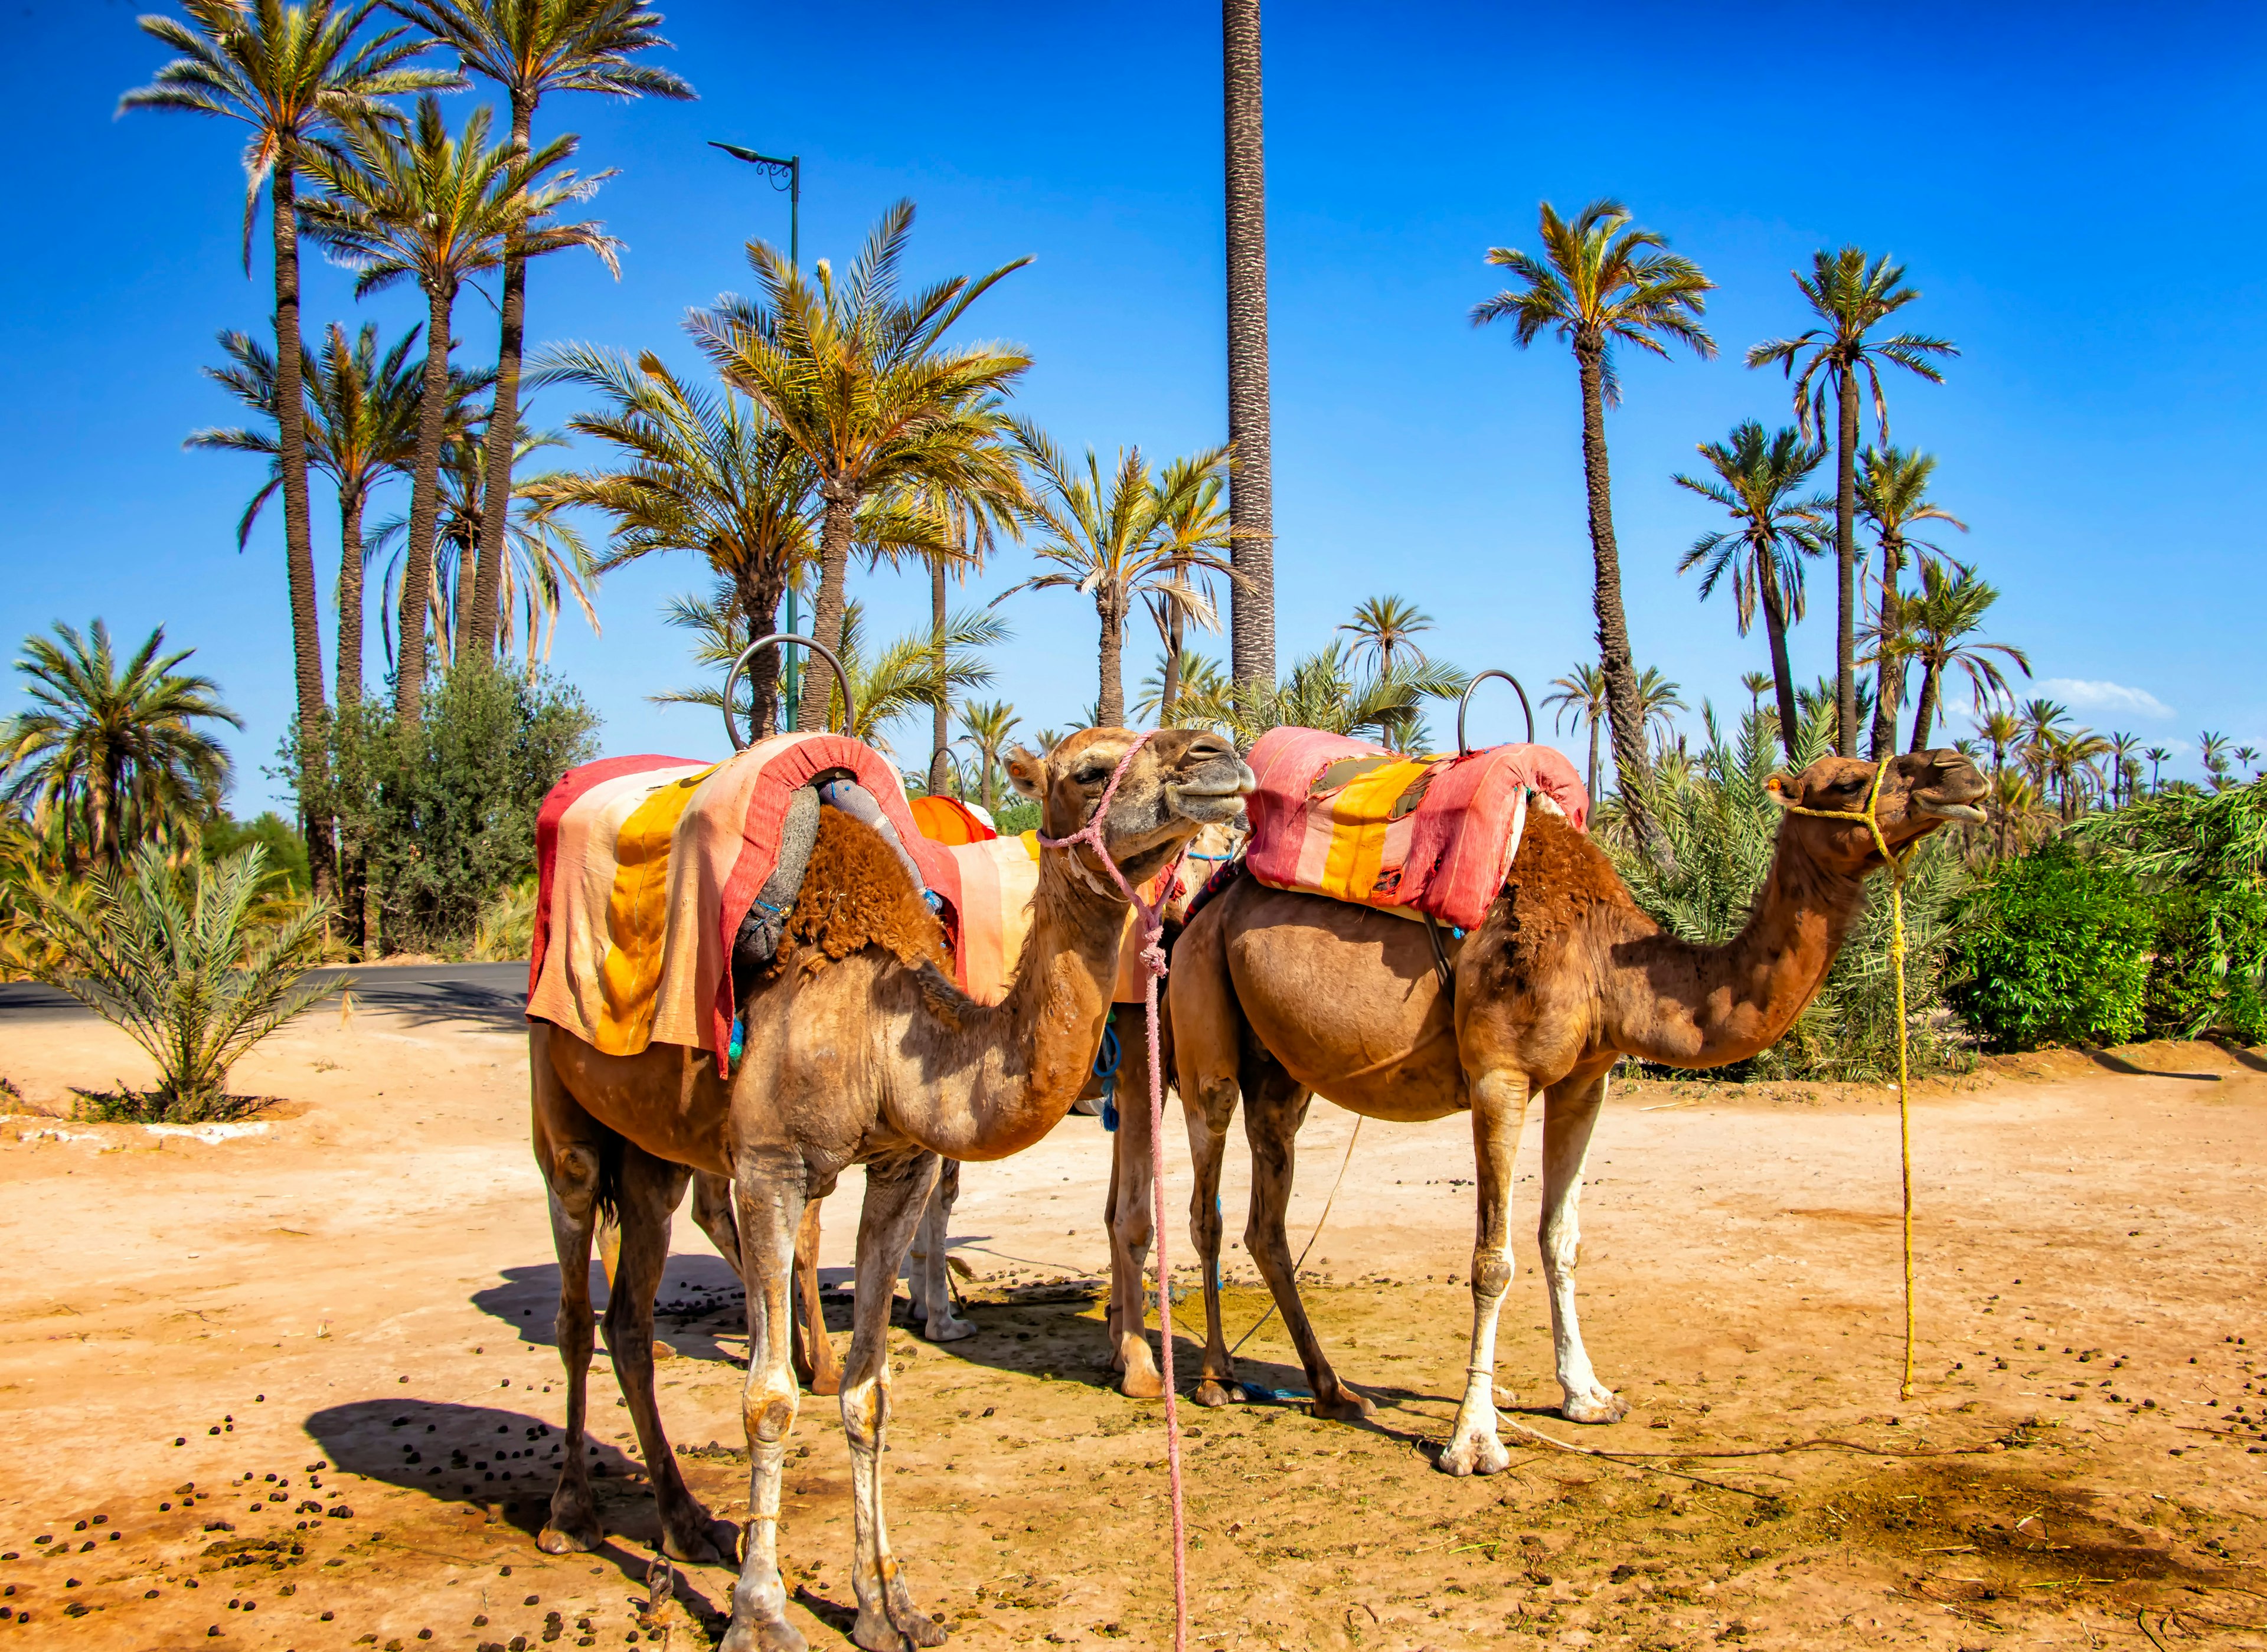 Two camels in Marrakech